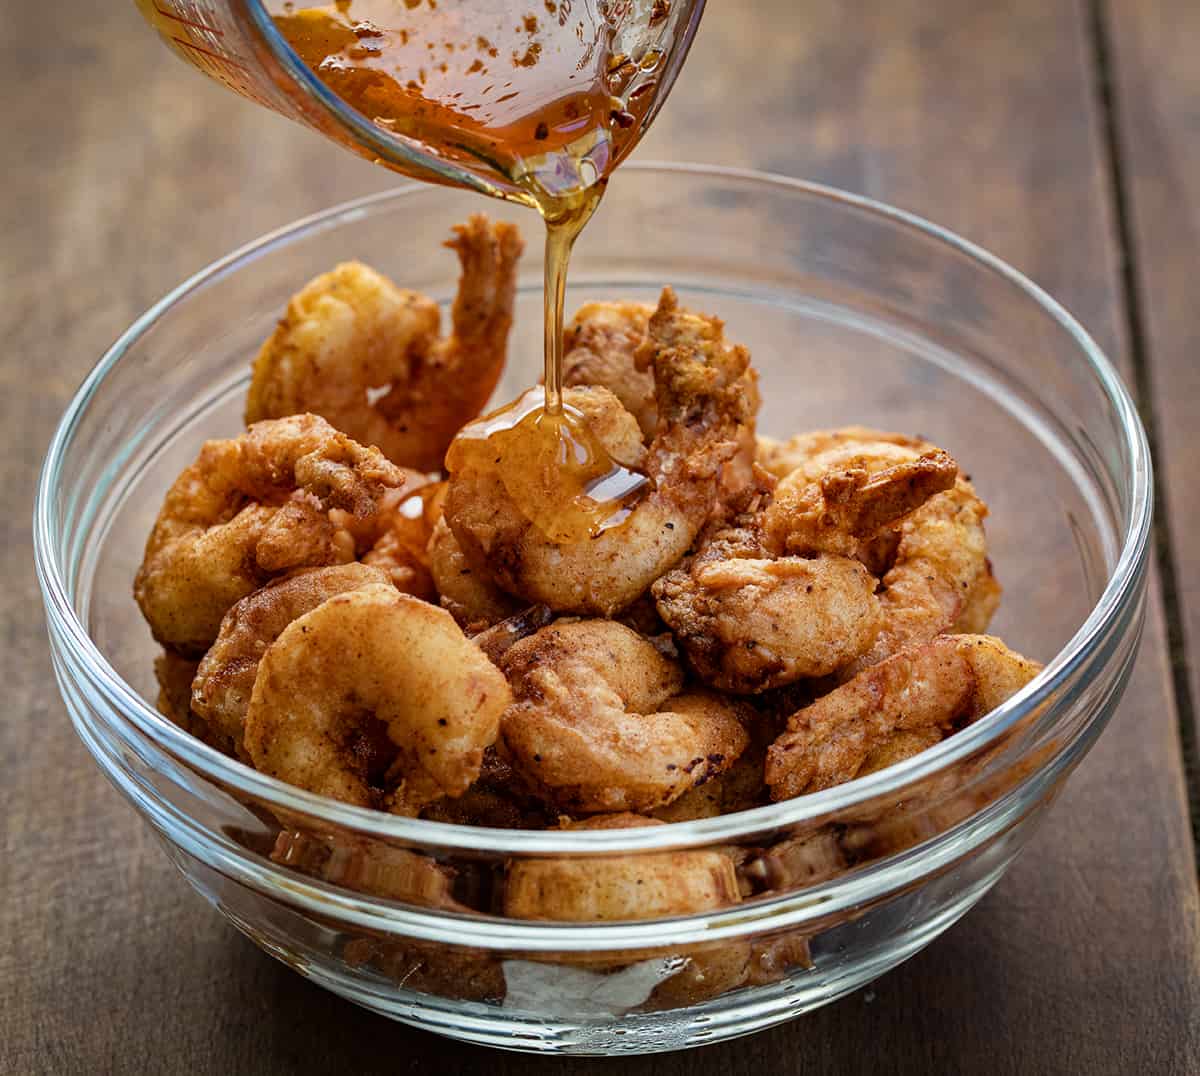 Pouring hot honey over fried shrimp in a glass bowl.